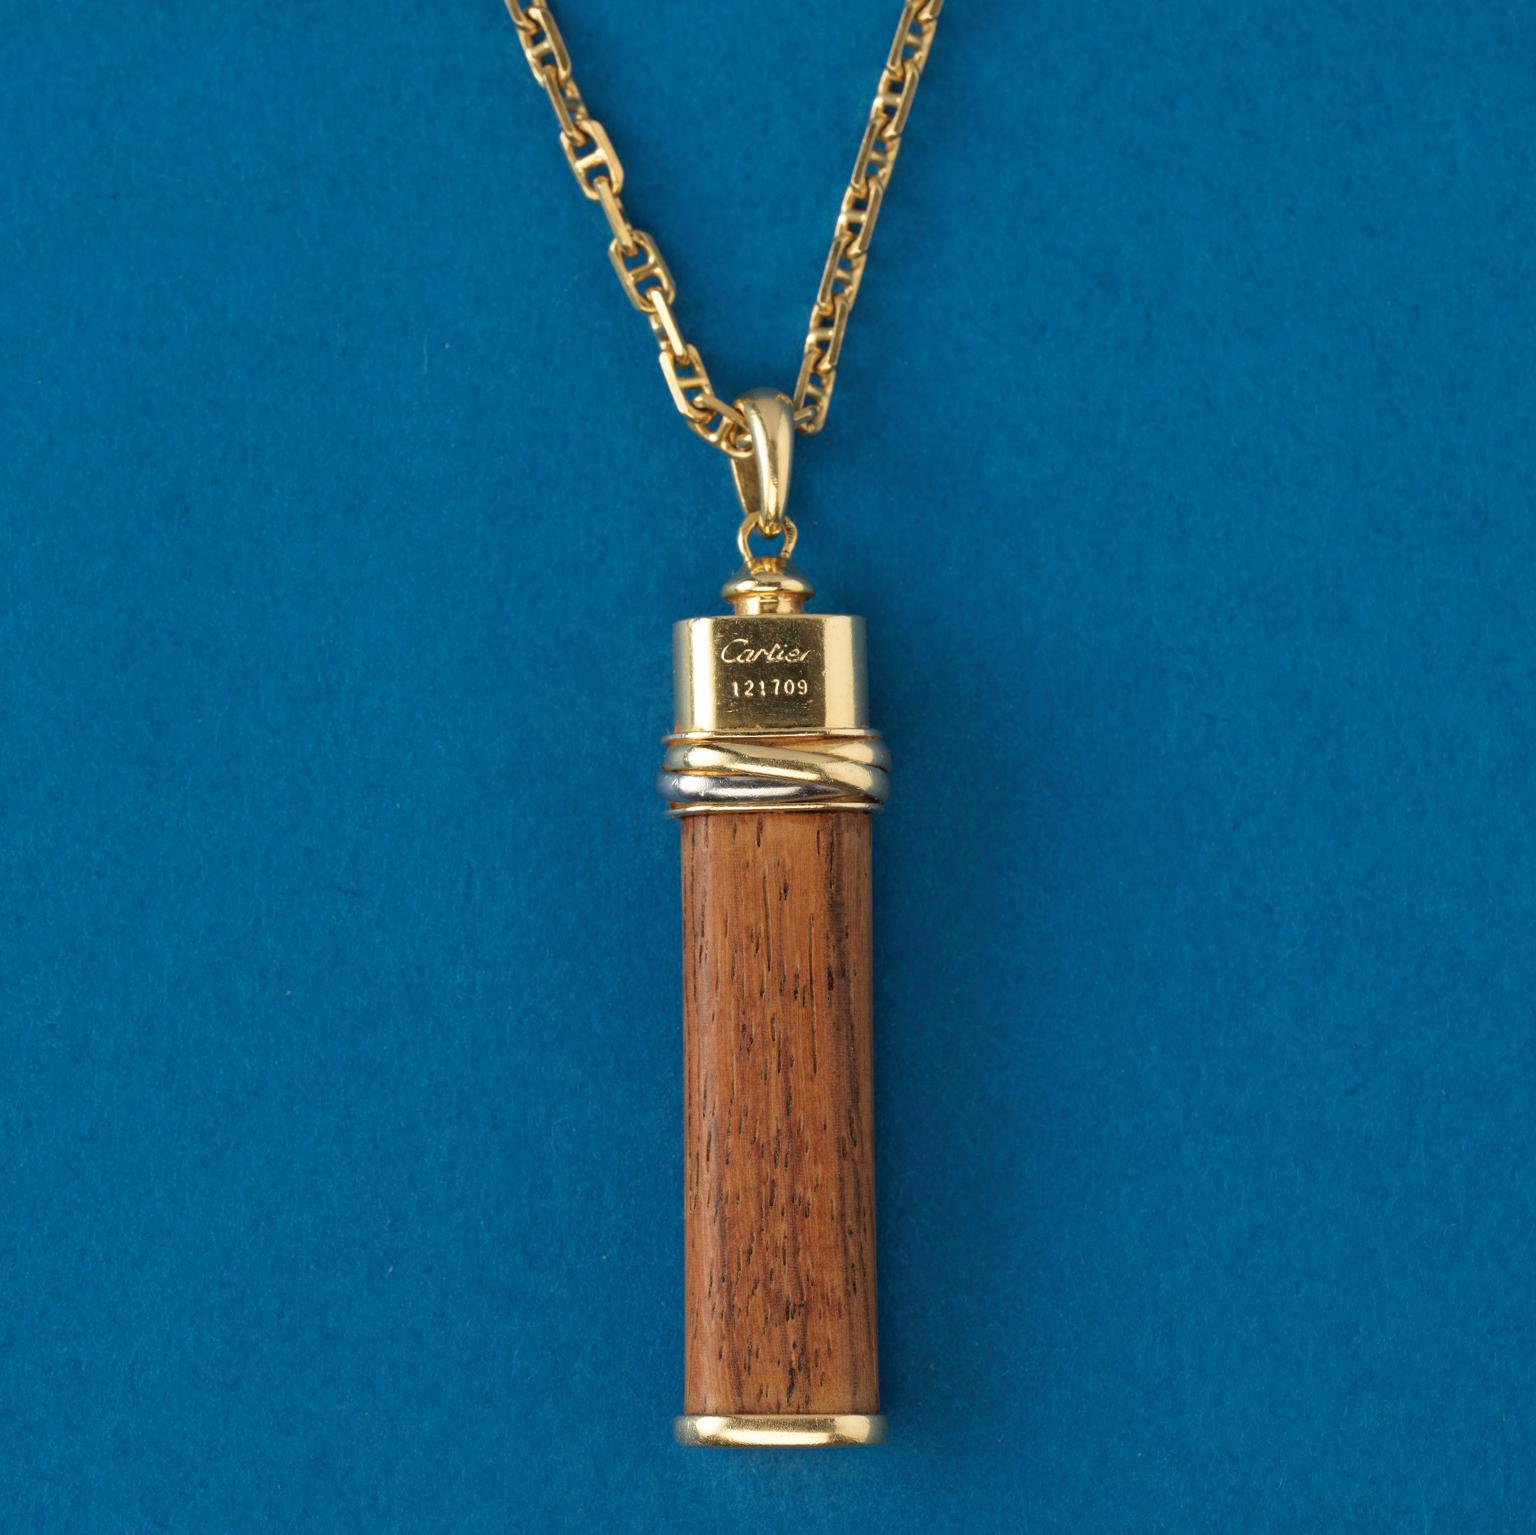 An 18 carat gold lucky “touch wood” or “toucher du bois” Cartier Trinity pendant. A long piece of wood with a tri-color gold band and an oval hoop, signed and numbered: Cartier 121709, circa 1980.

weight: 7.39 gram.
dimensions: 5.8 x 1.2 cm.